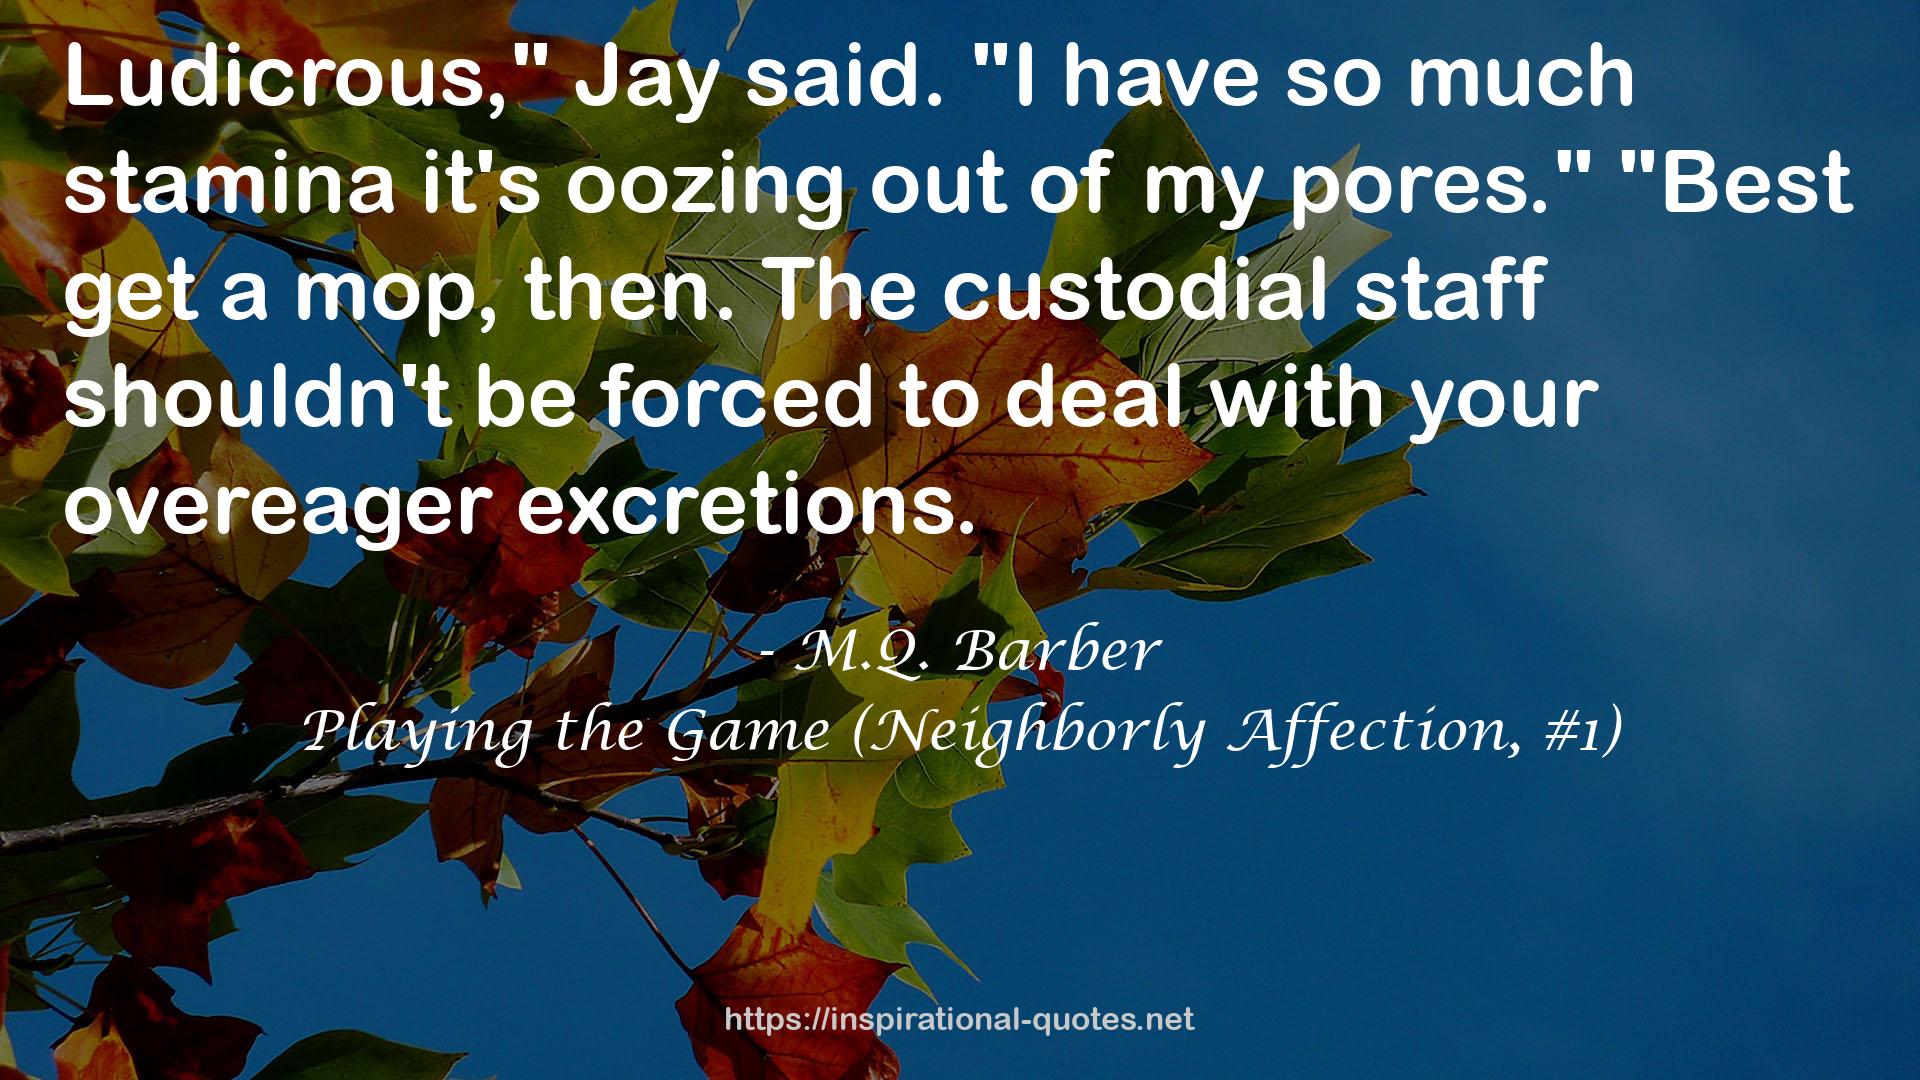 Playing the Game (Neighborly Affection, #1) QUOTES